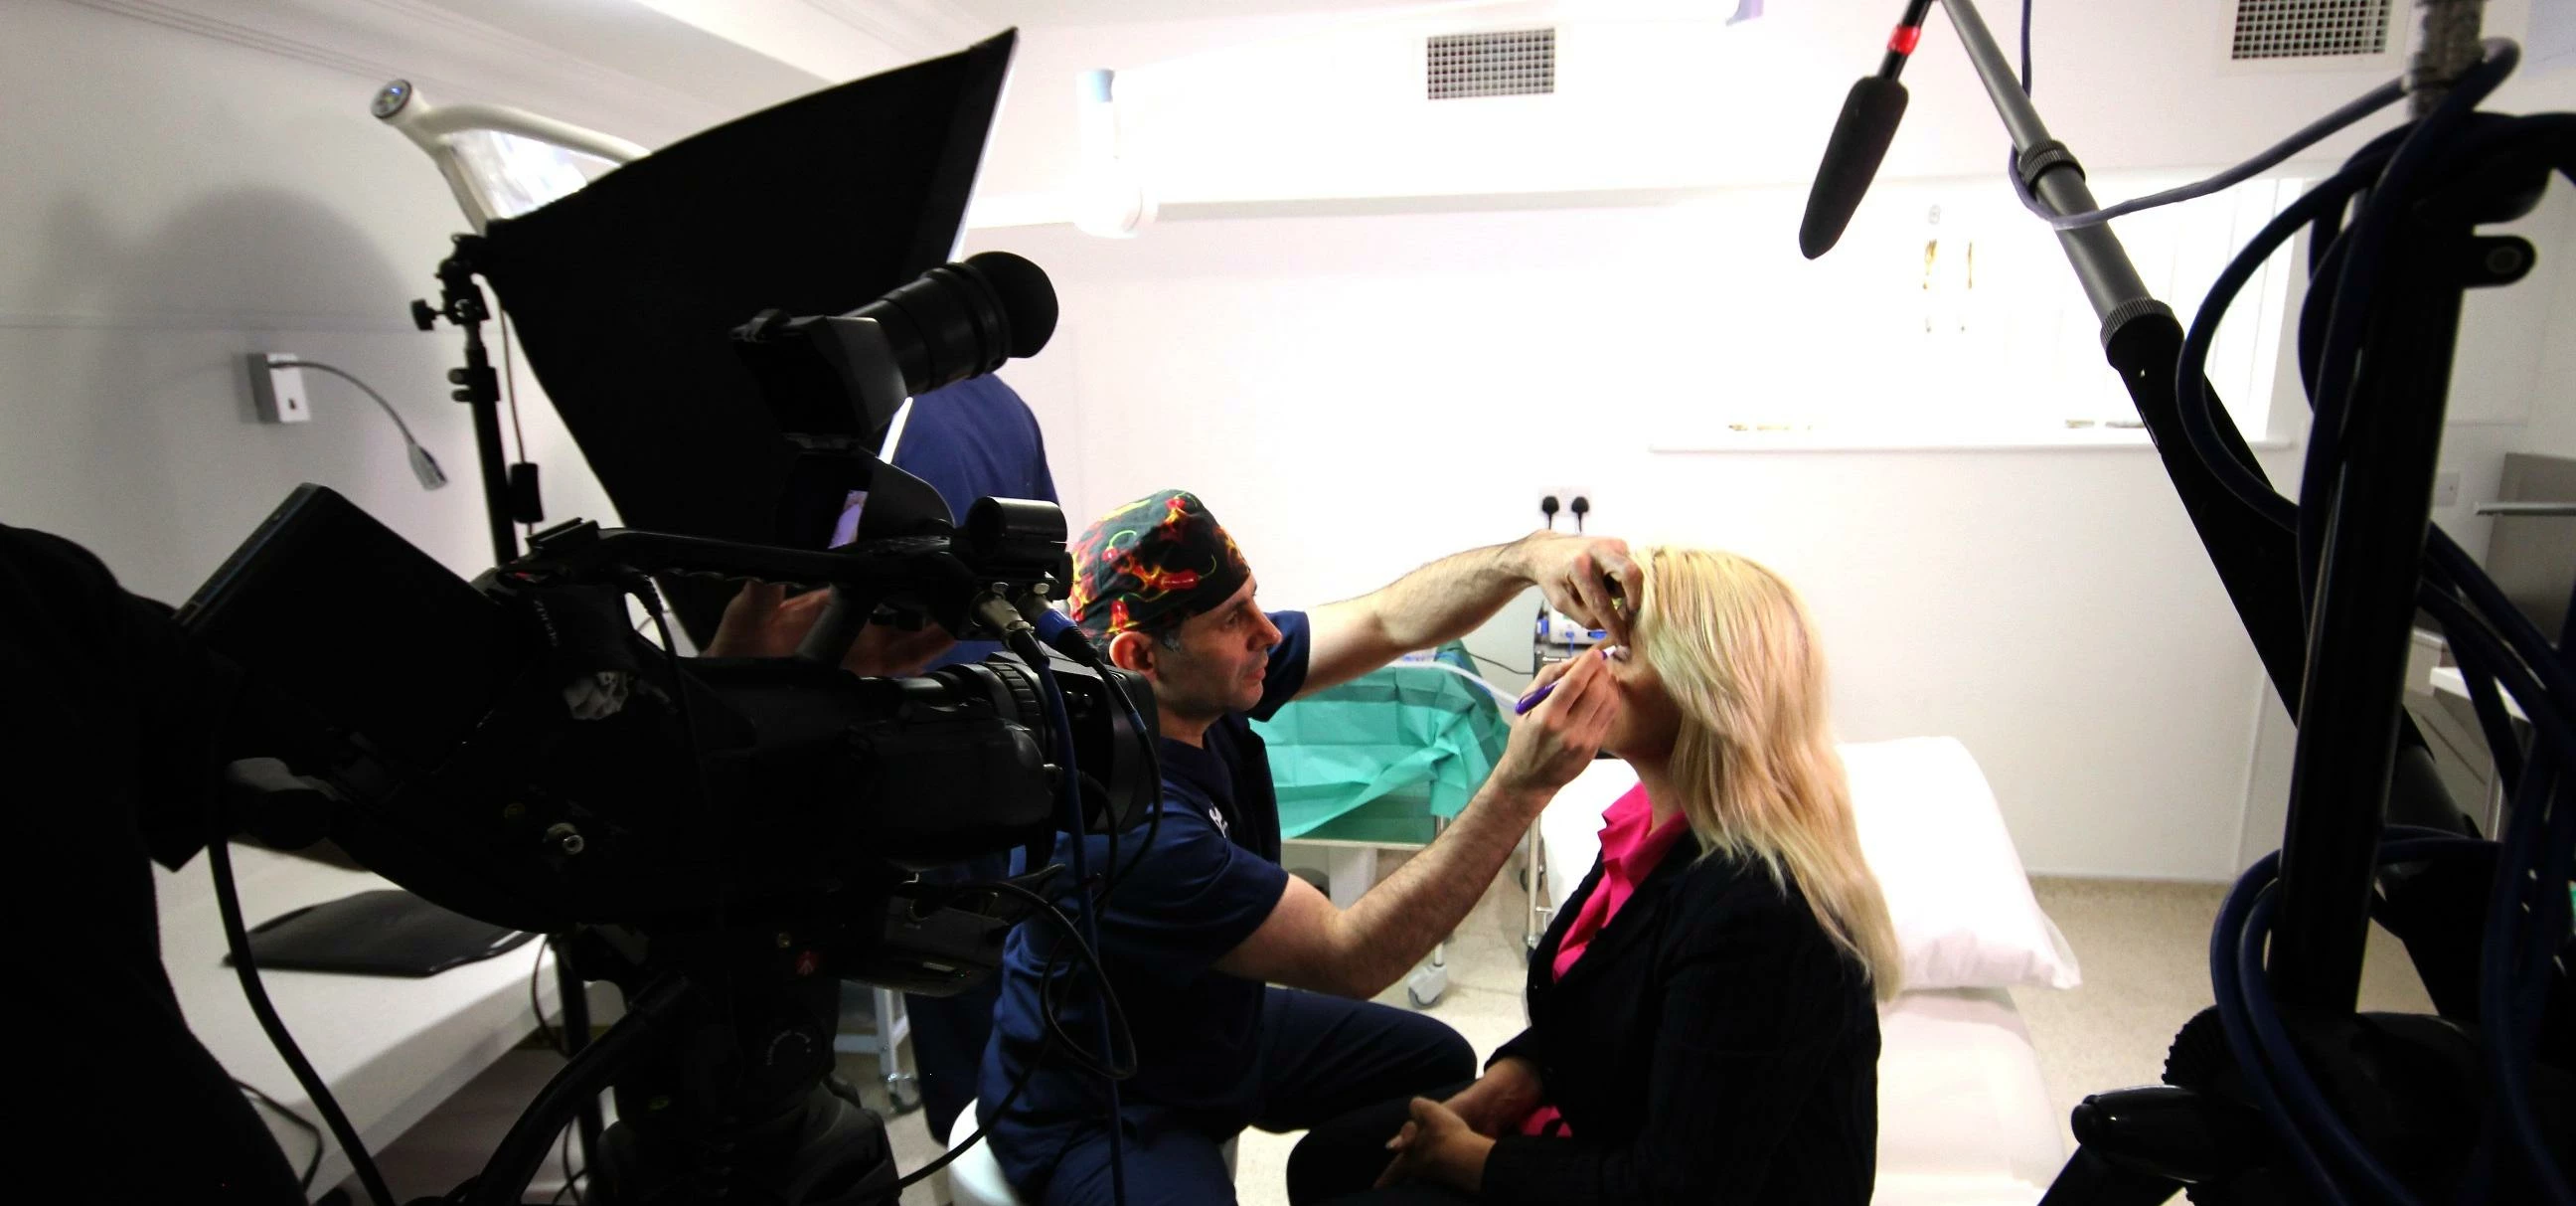 Lead surgeon Amir Nakhdjevani preps a patient for eyelid surgery